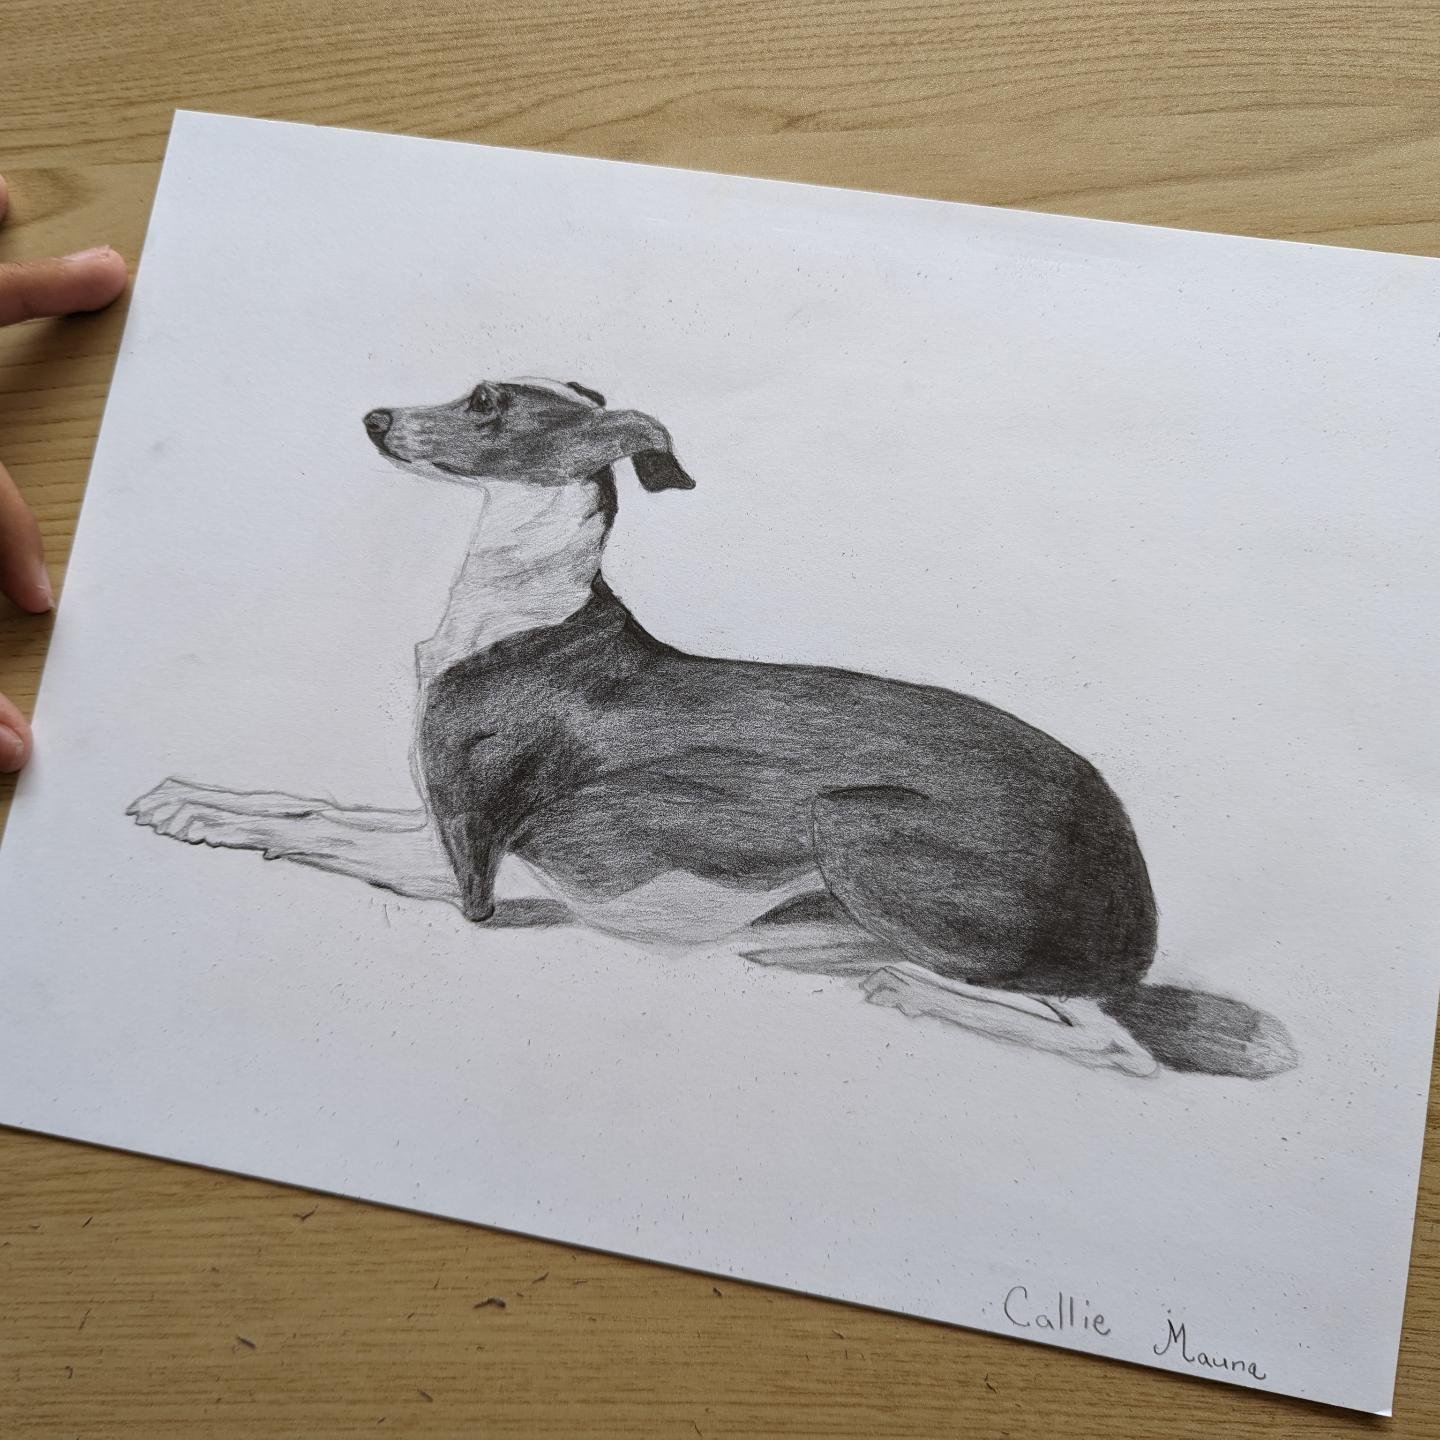 Our middle school student, Callie, just completed this exceptional pencil drawing of a dog. Great work! 

#artclass #artstudent #kidsart